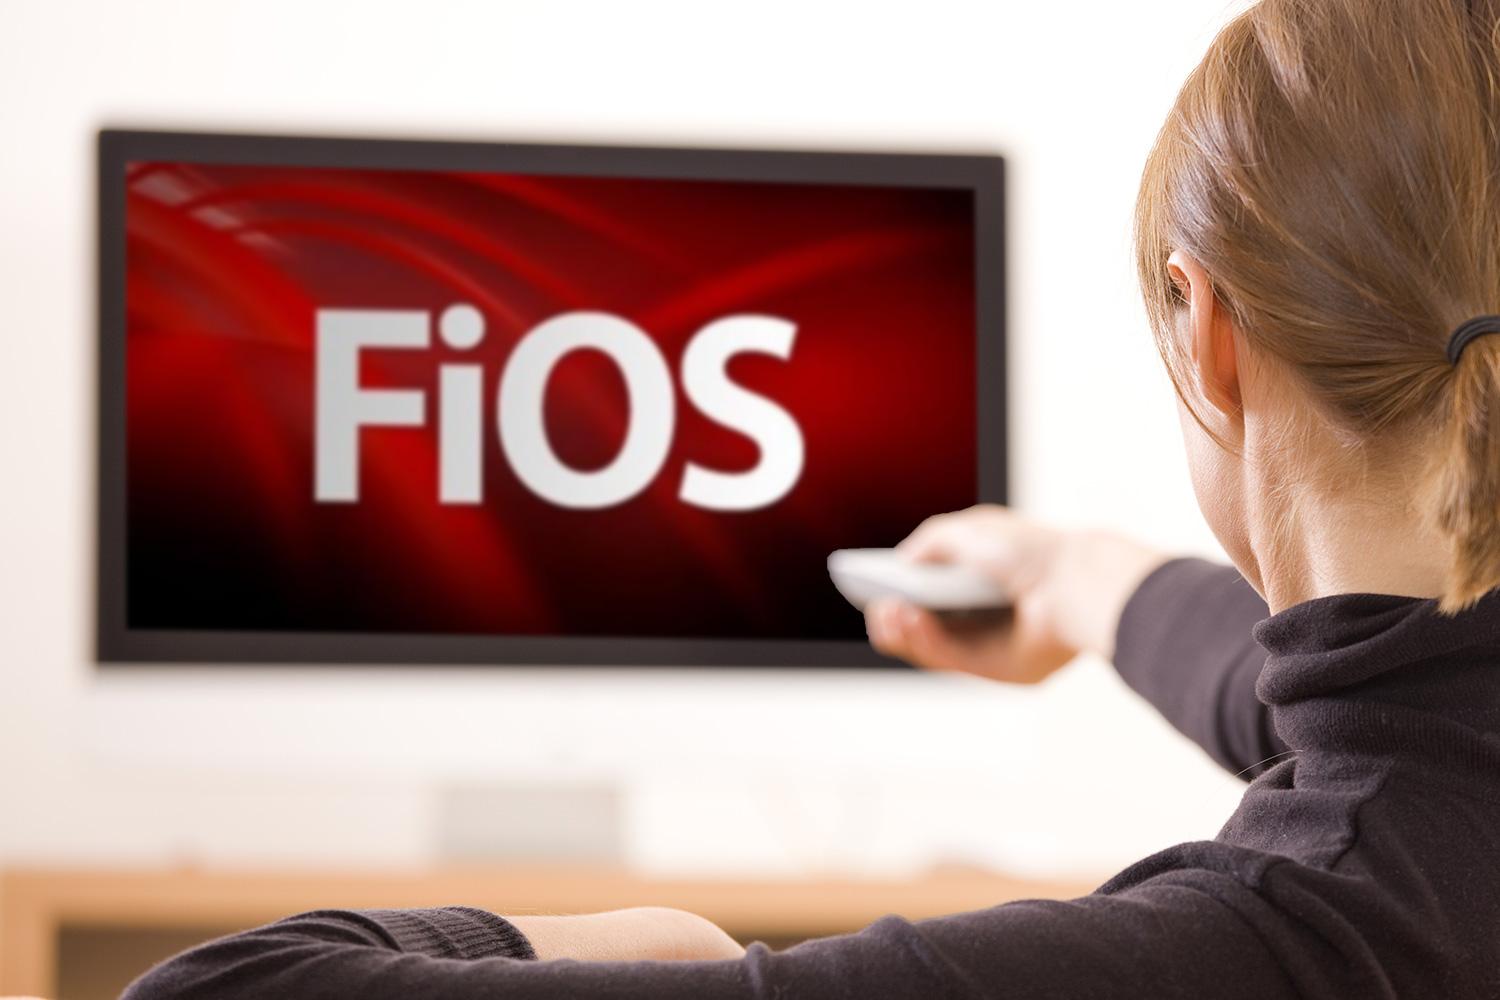 Ideal Verizon Fios new shopper discounts for July 2022